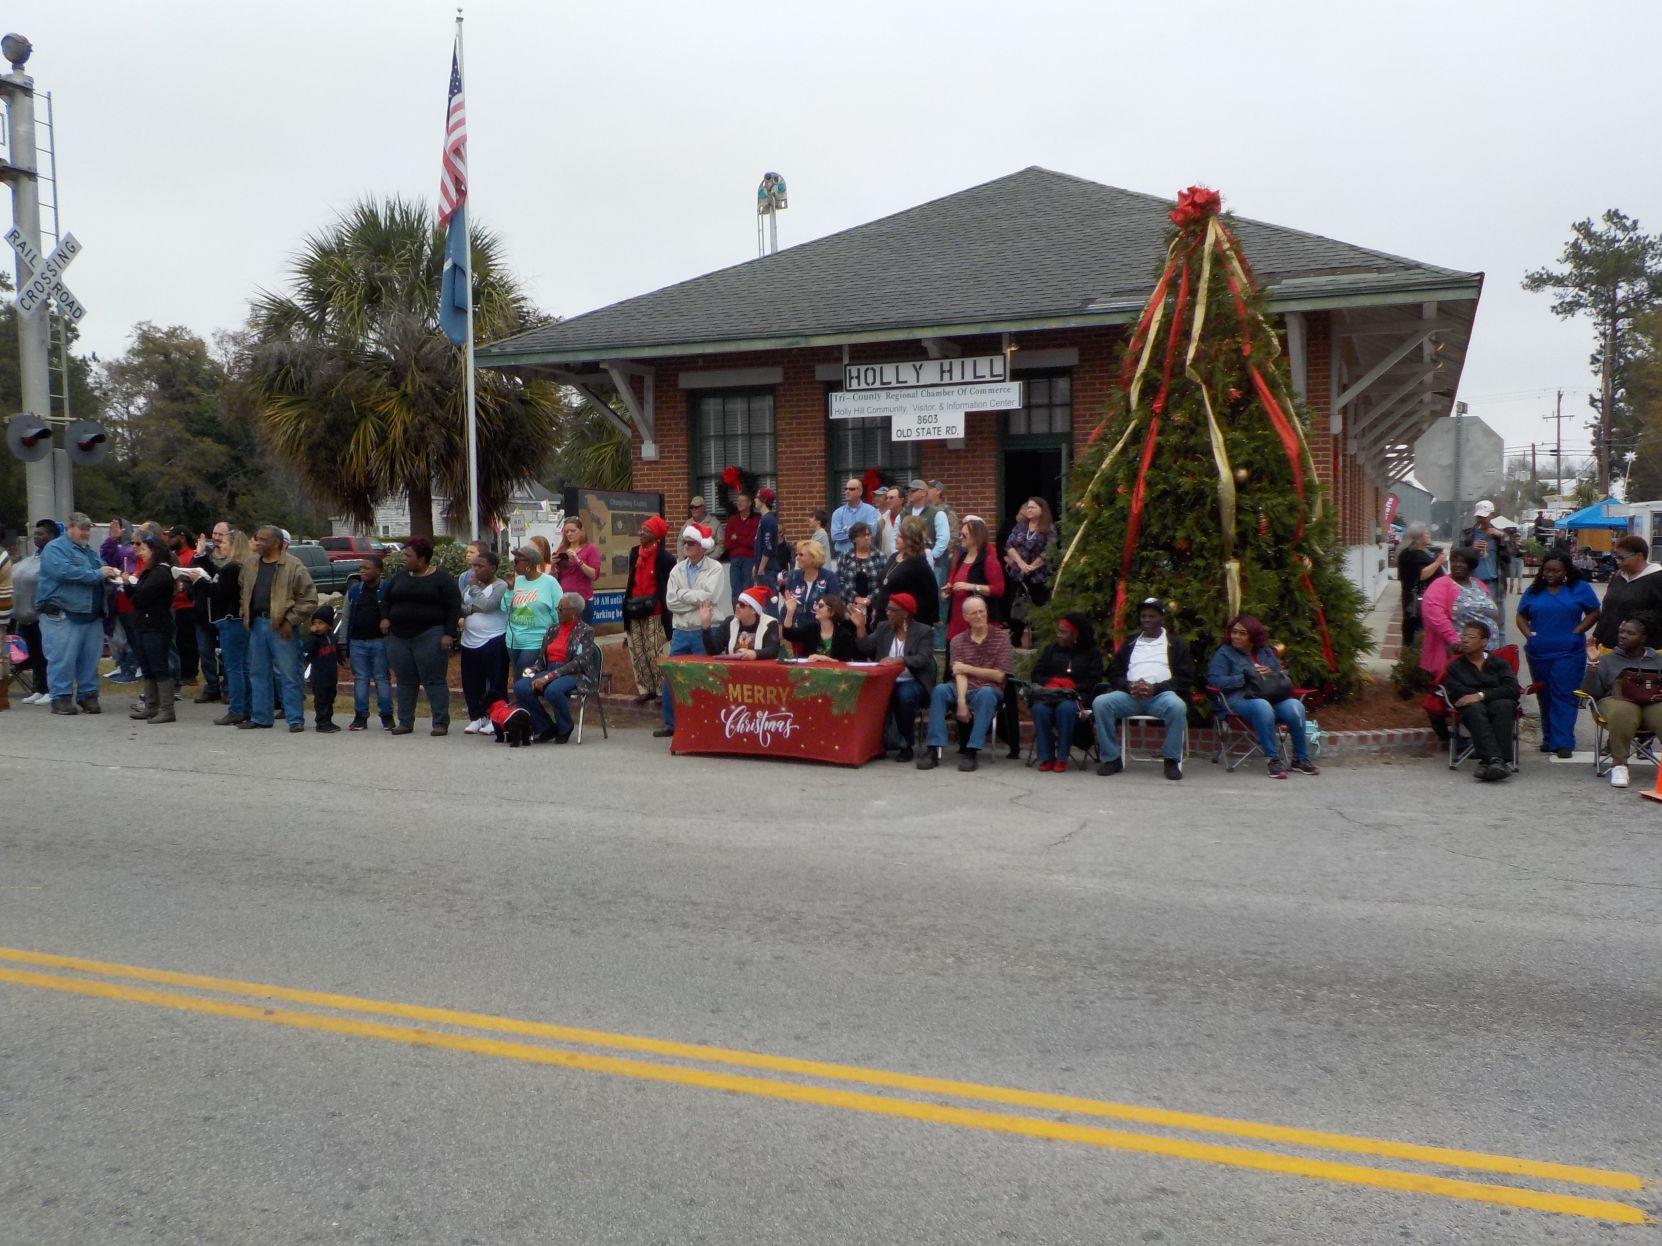 More photos from the Holly Hill Christmas Festival and Parade